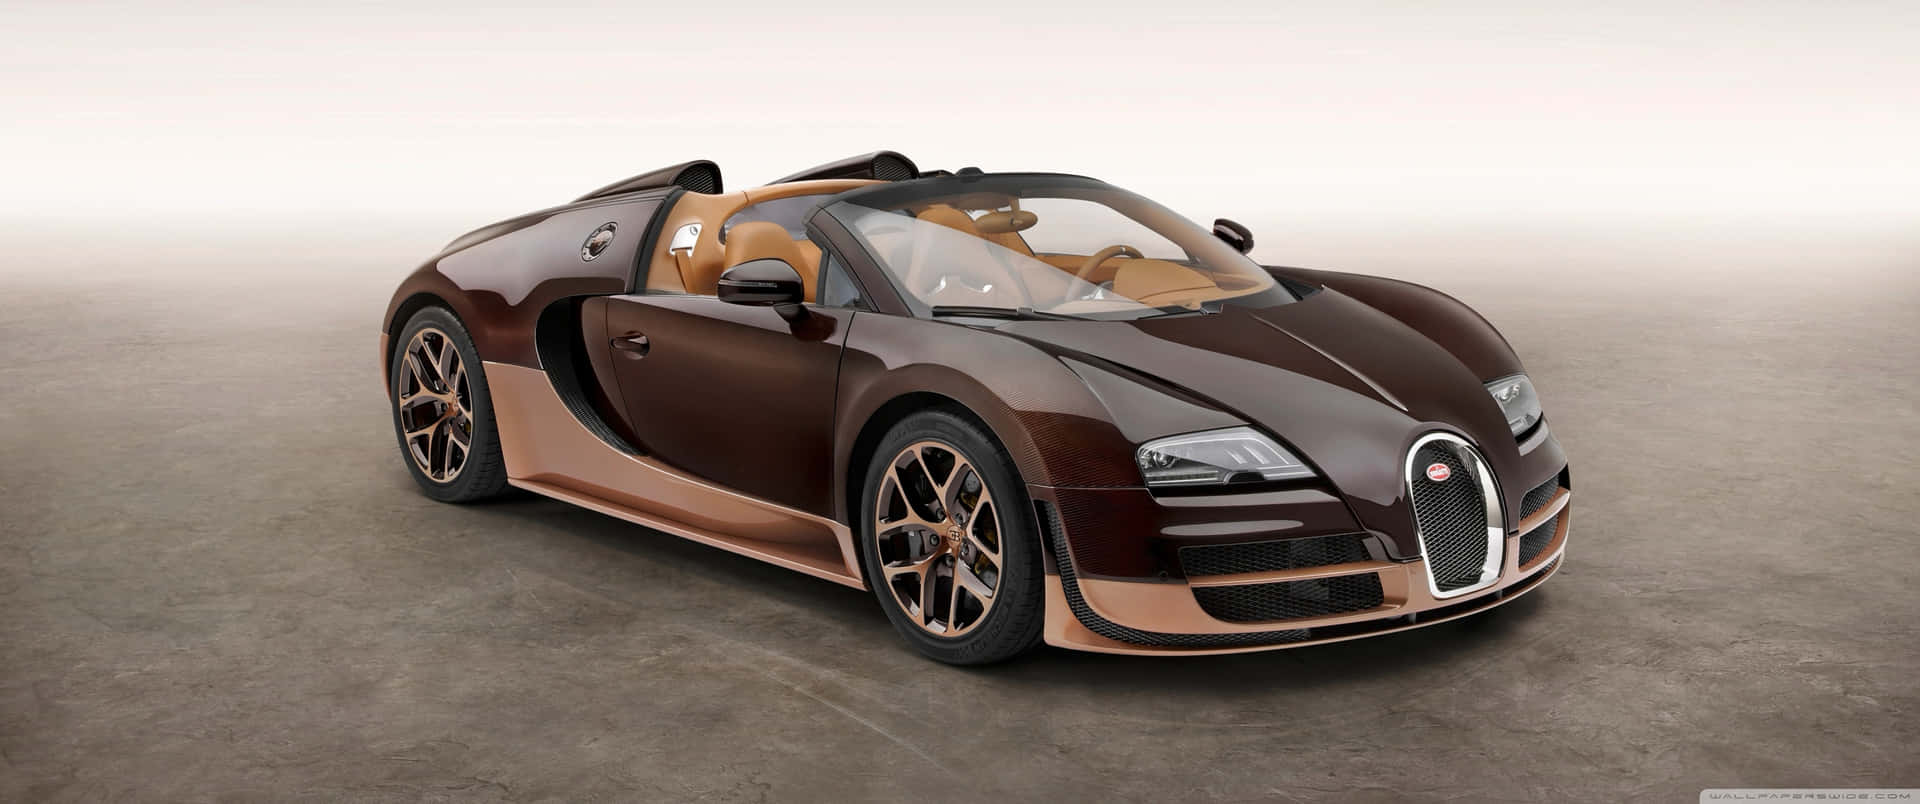 Experience Luxury and Performance With the Best Bugatti